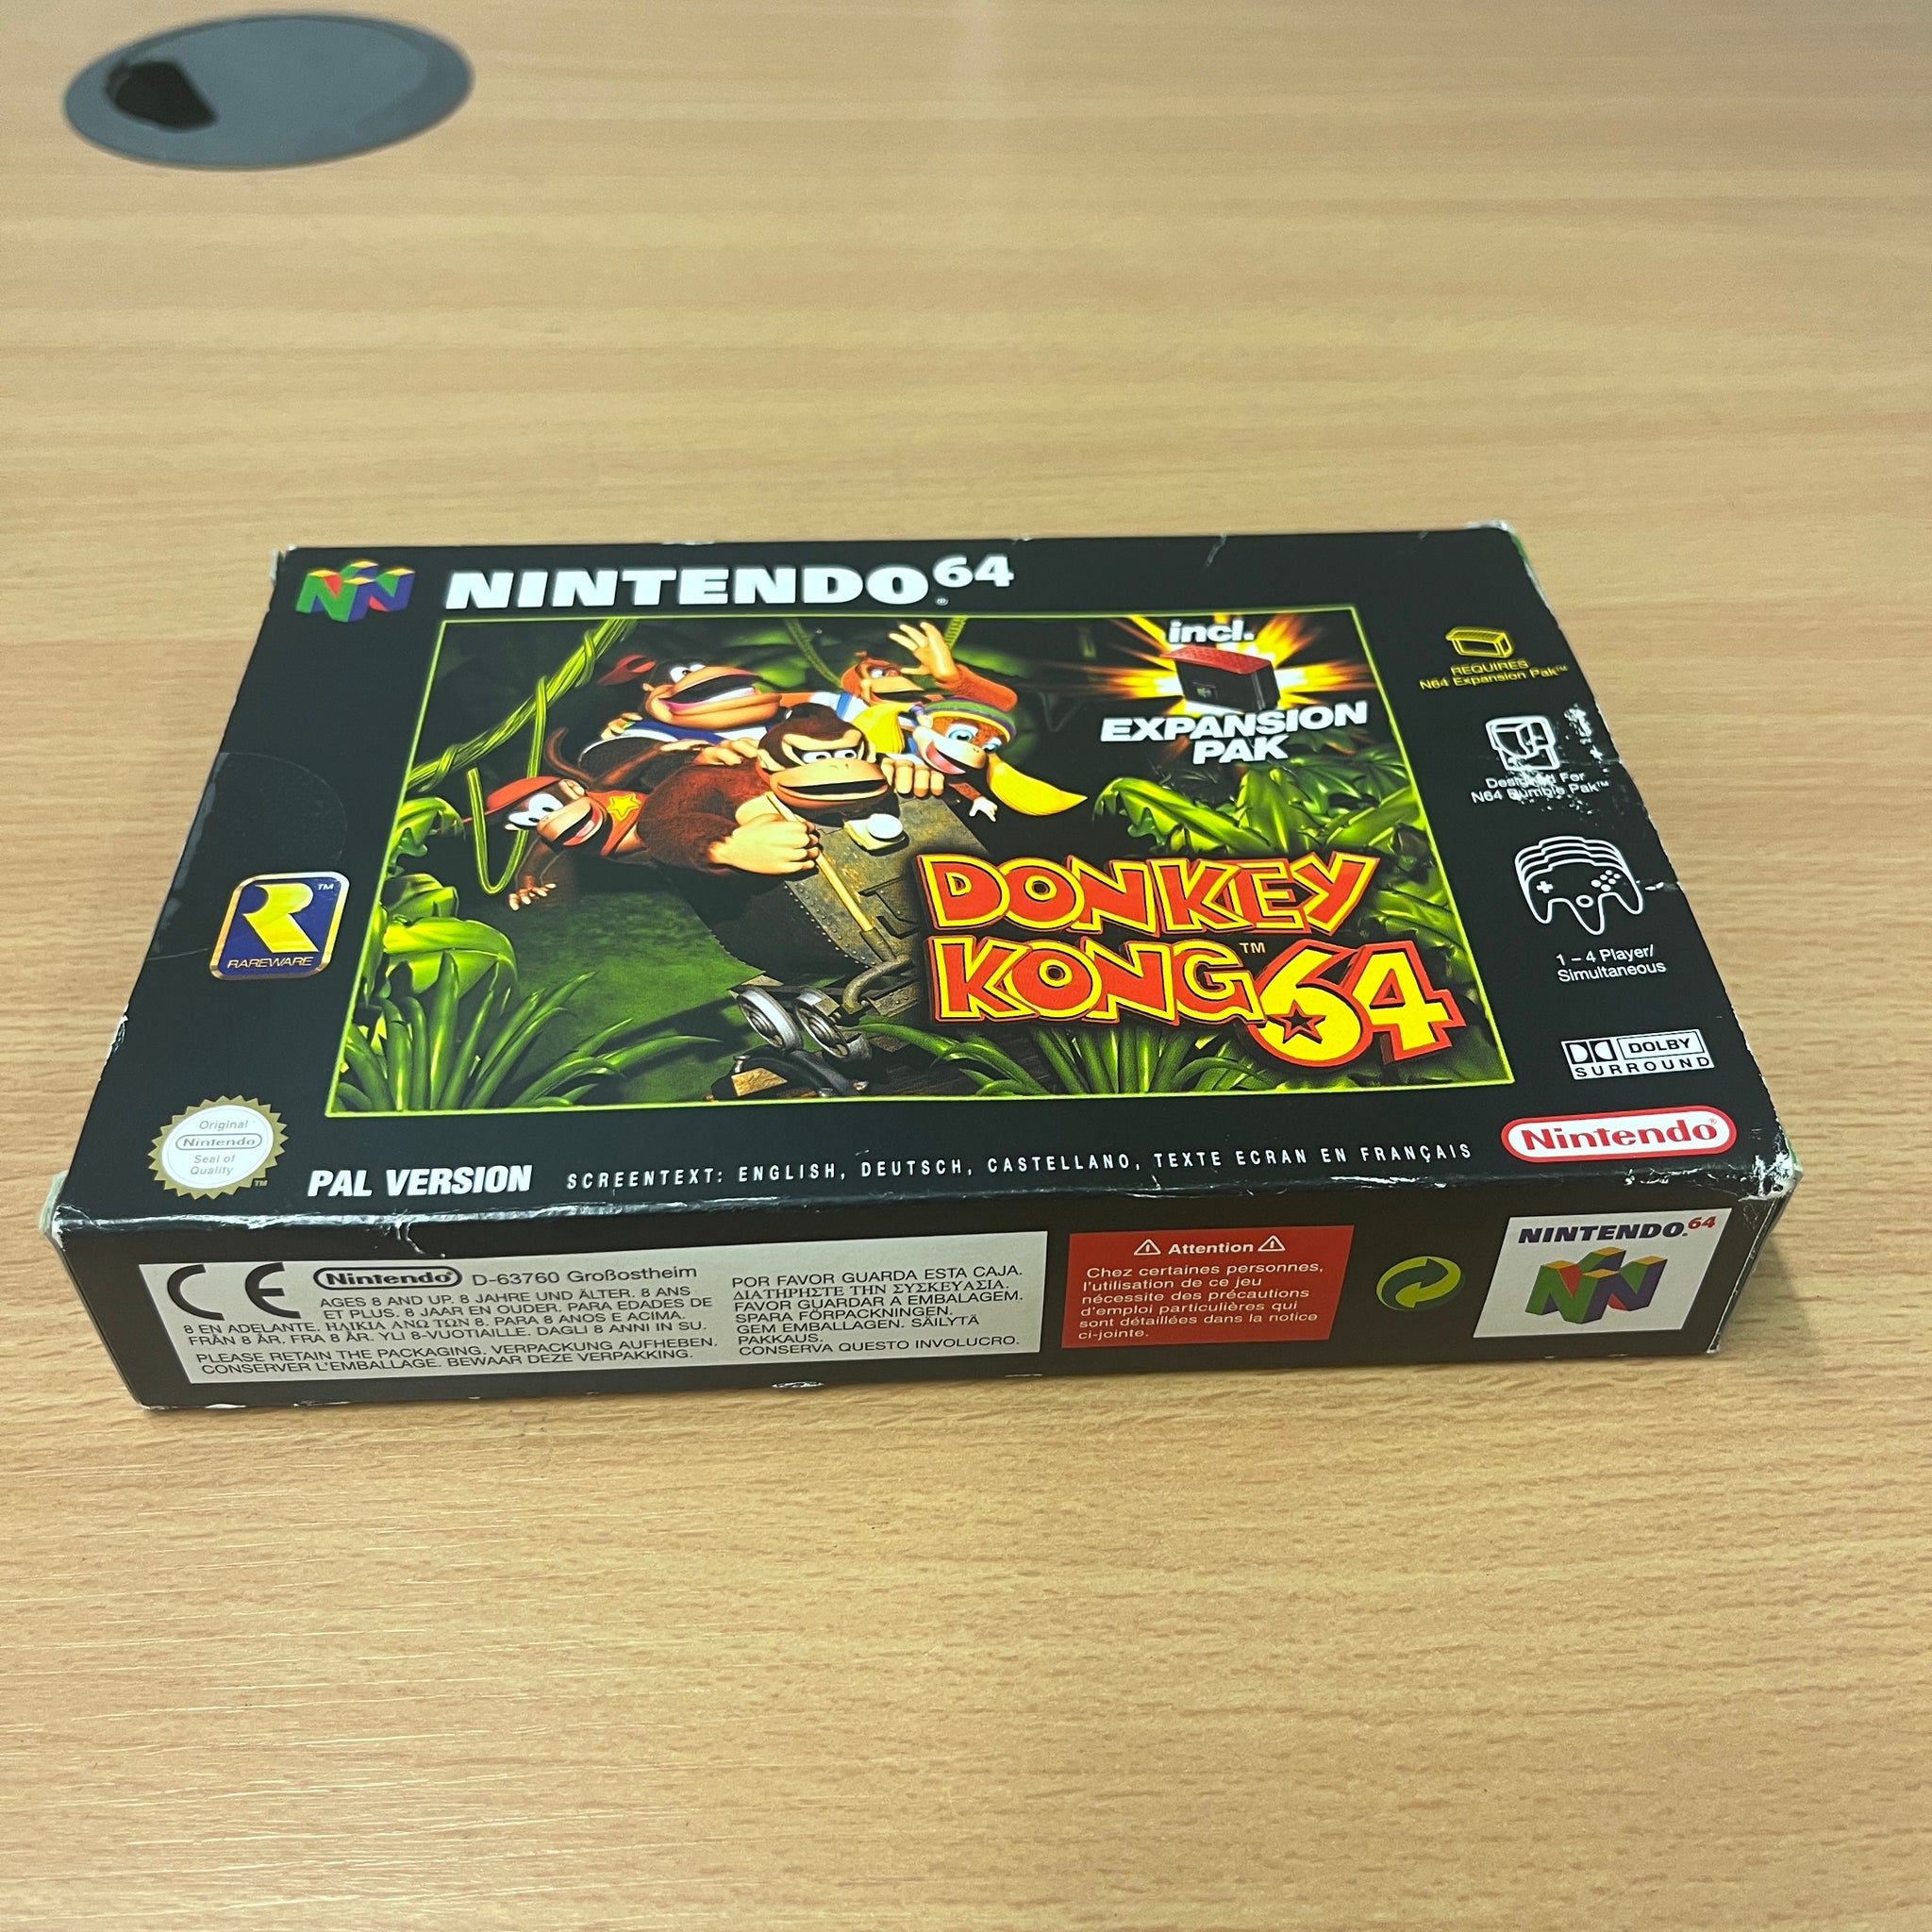 Donkey kong 64 n64 game boxed no expansion pack